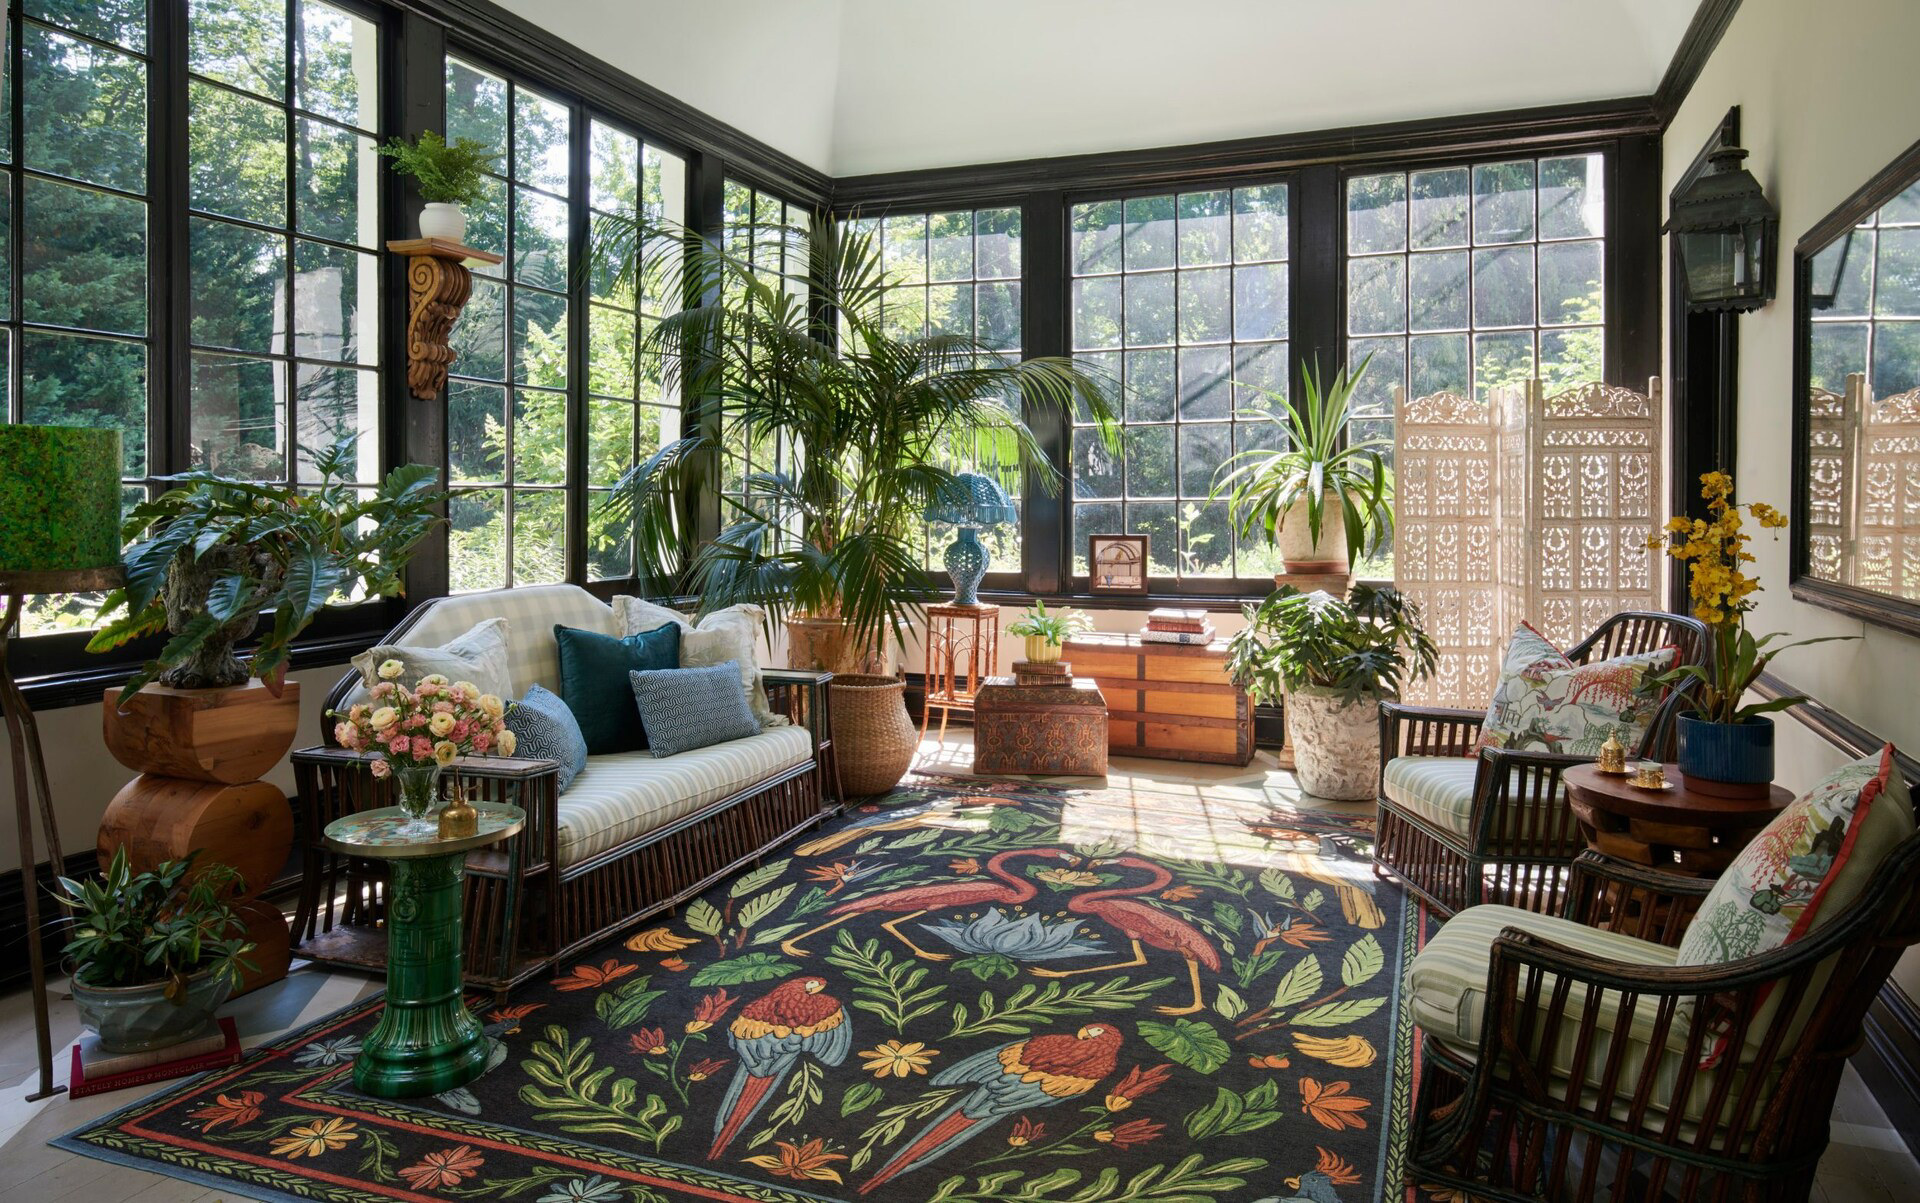 How to choose the perfect rug for your home